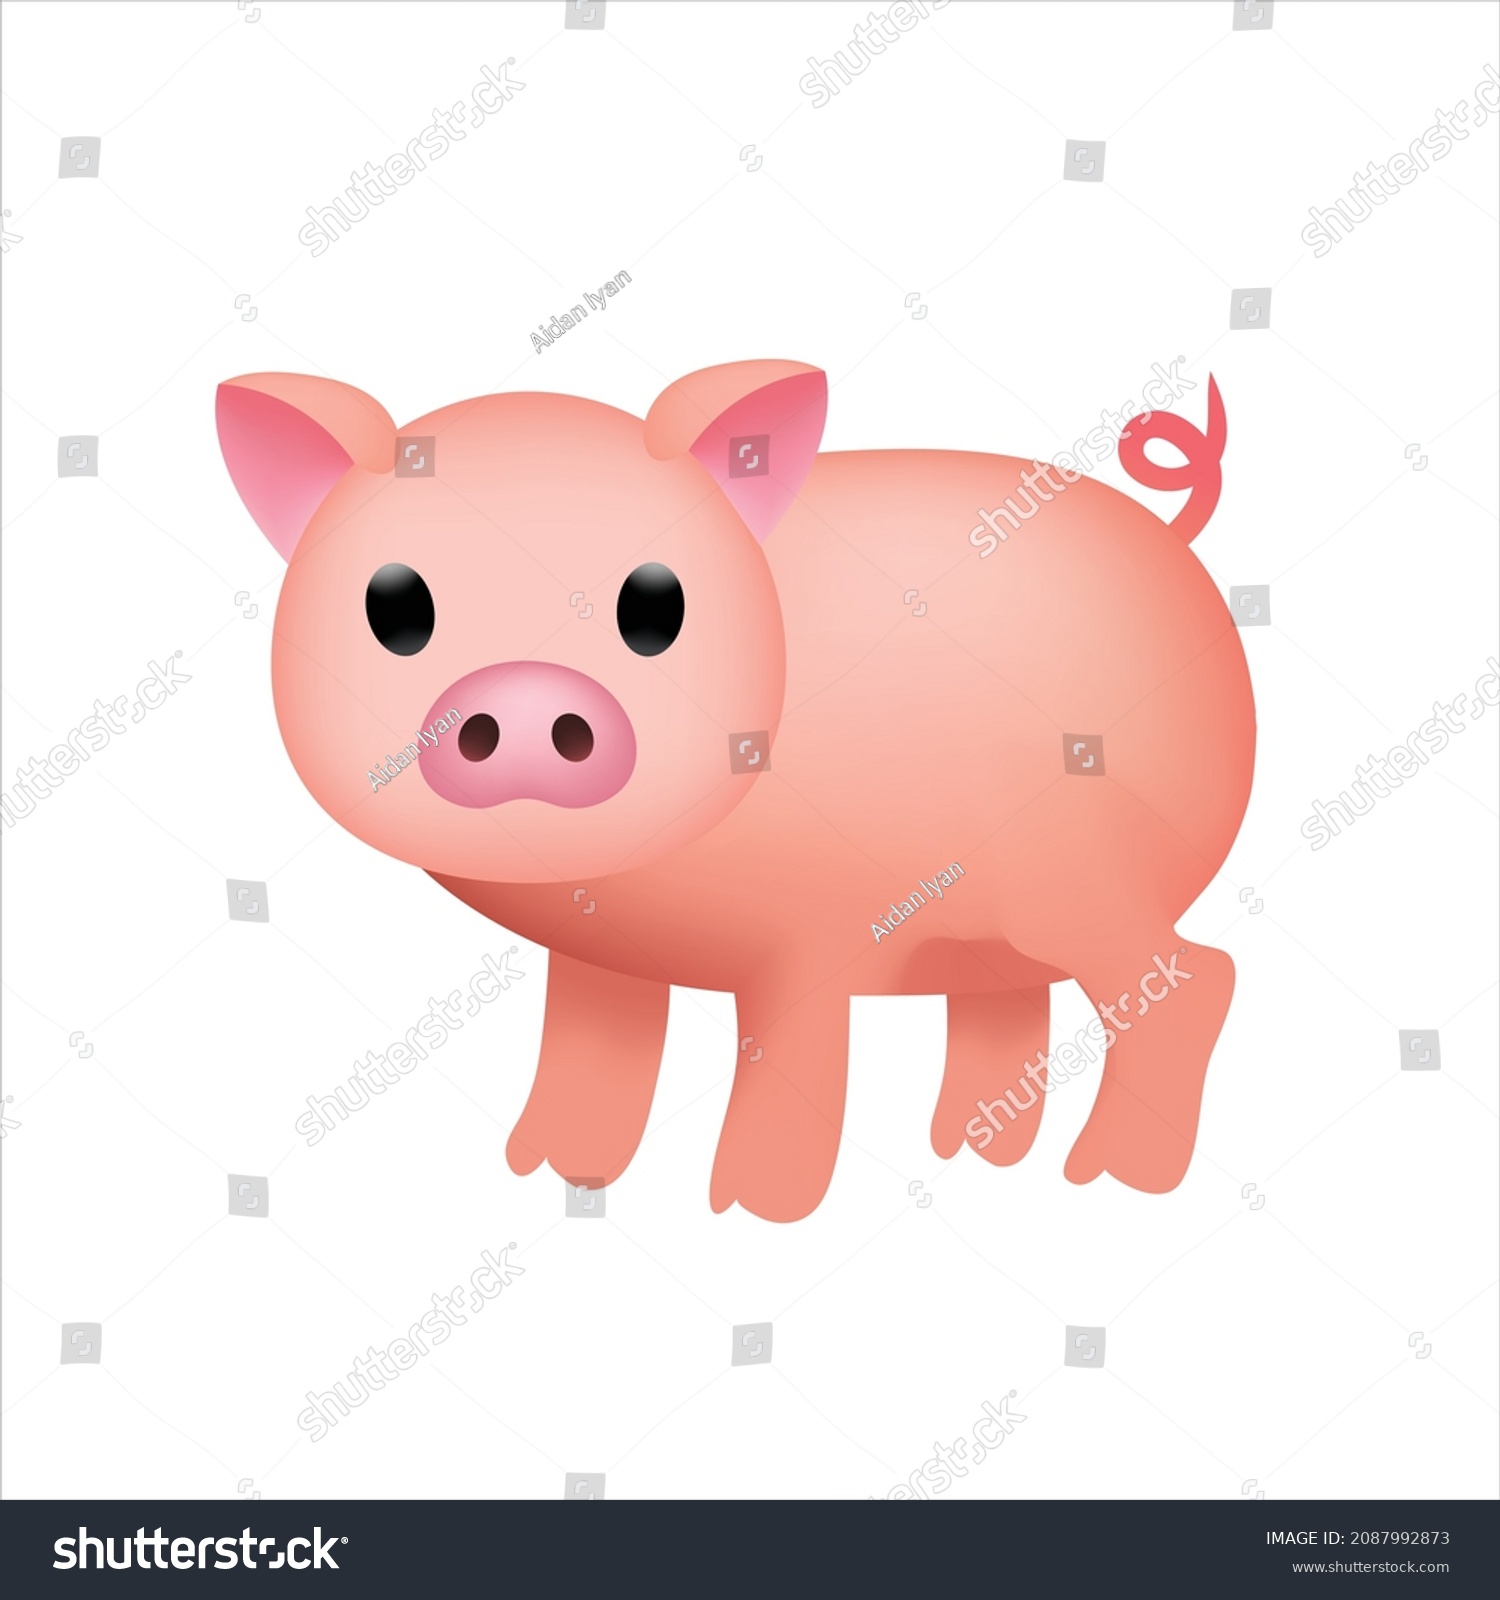 SVG of Pig Hog Sow nose face vector template design element. Use for poster education school kid children text emoji emotion expression reactions chat comment social media app smartphone to family friends svg